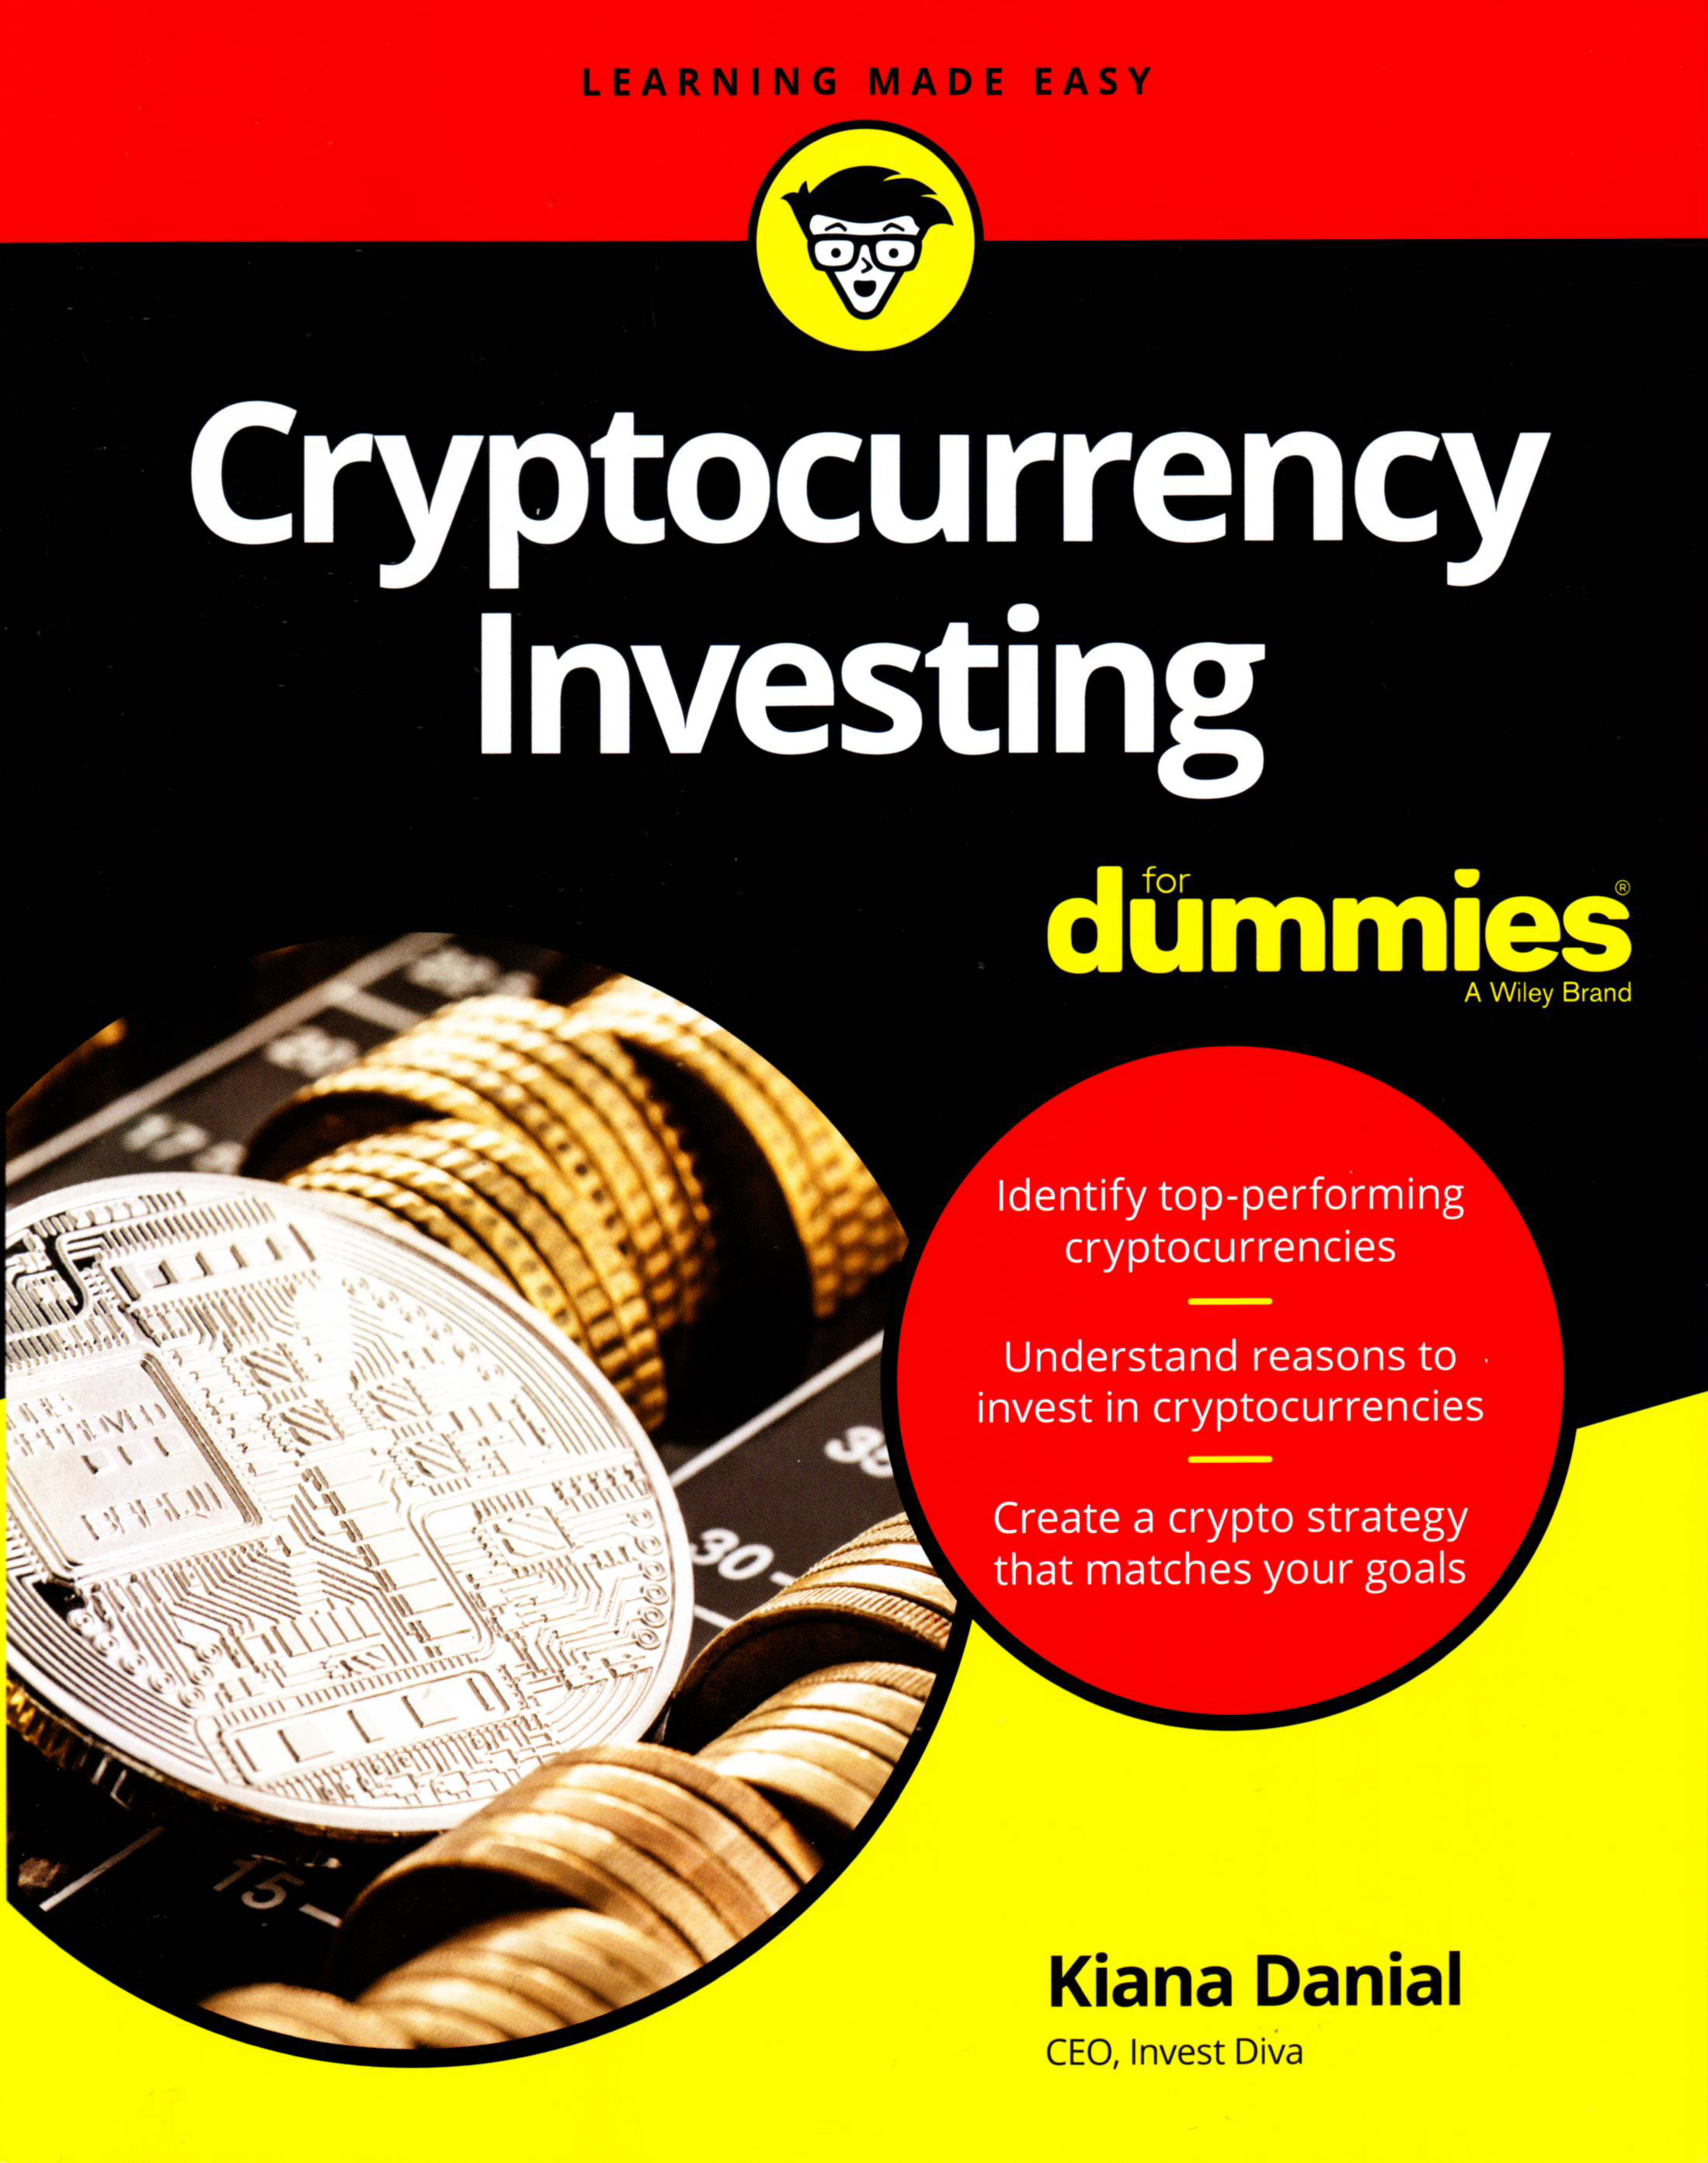 Cryptocurrency Investing For Dummies